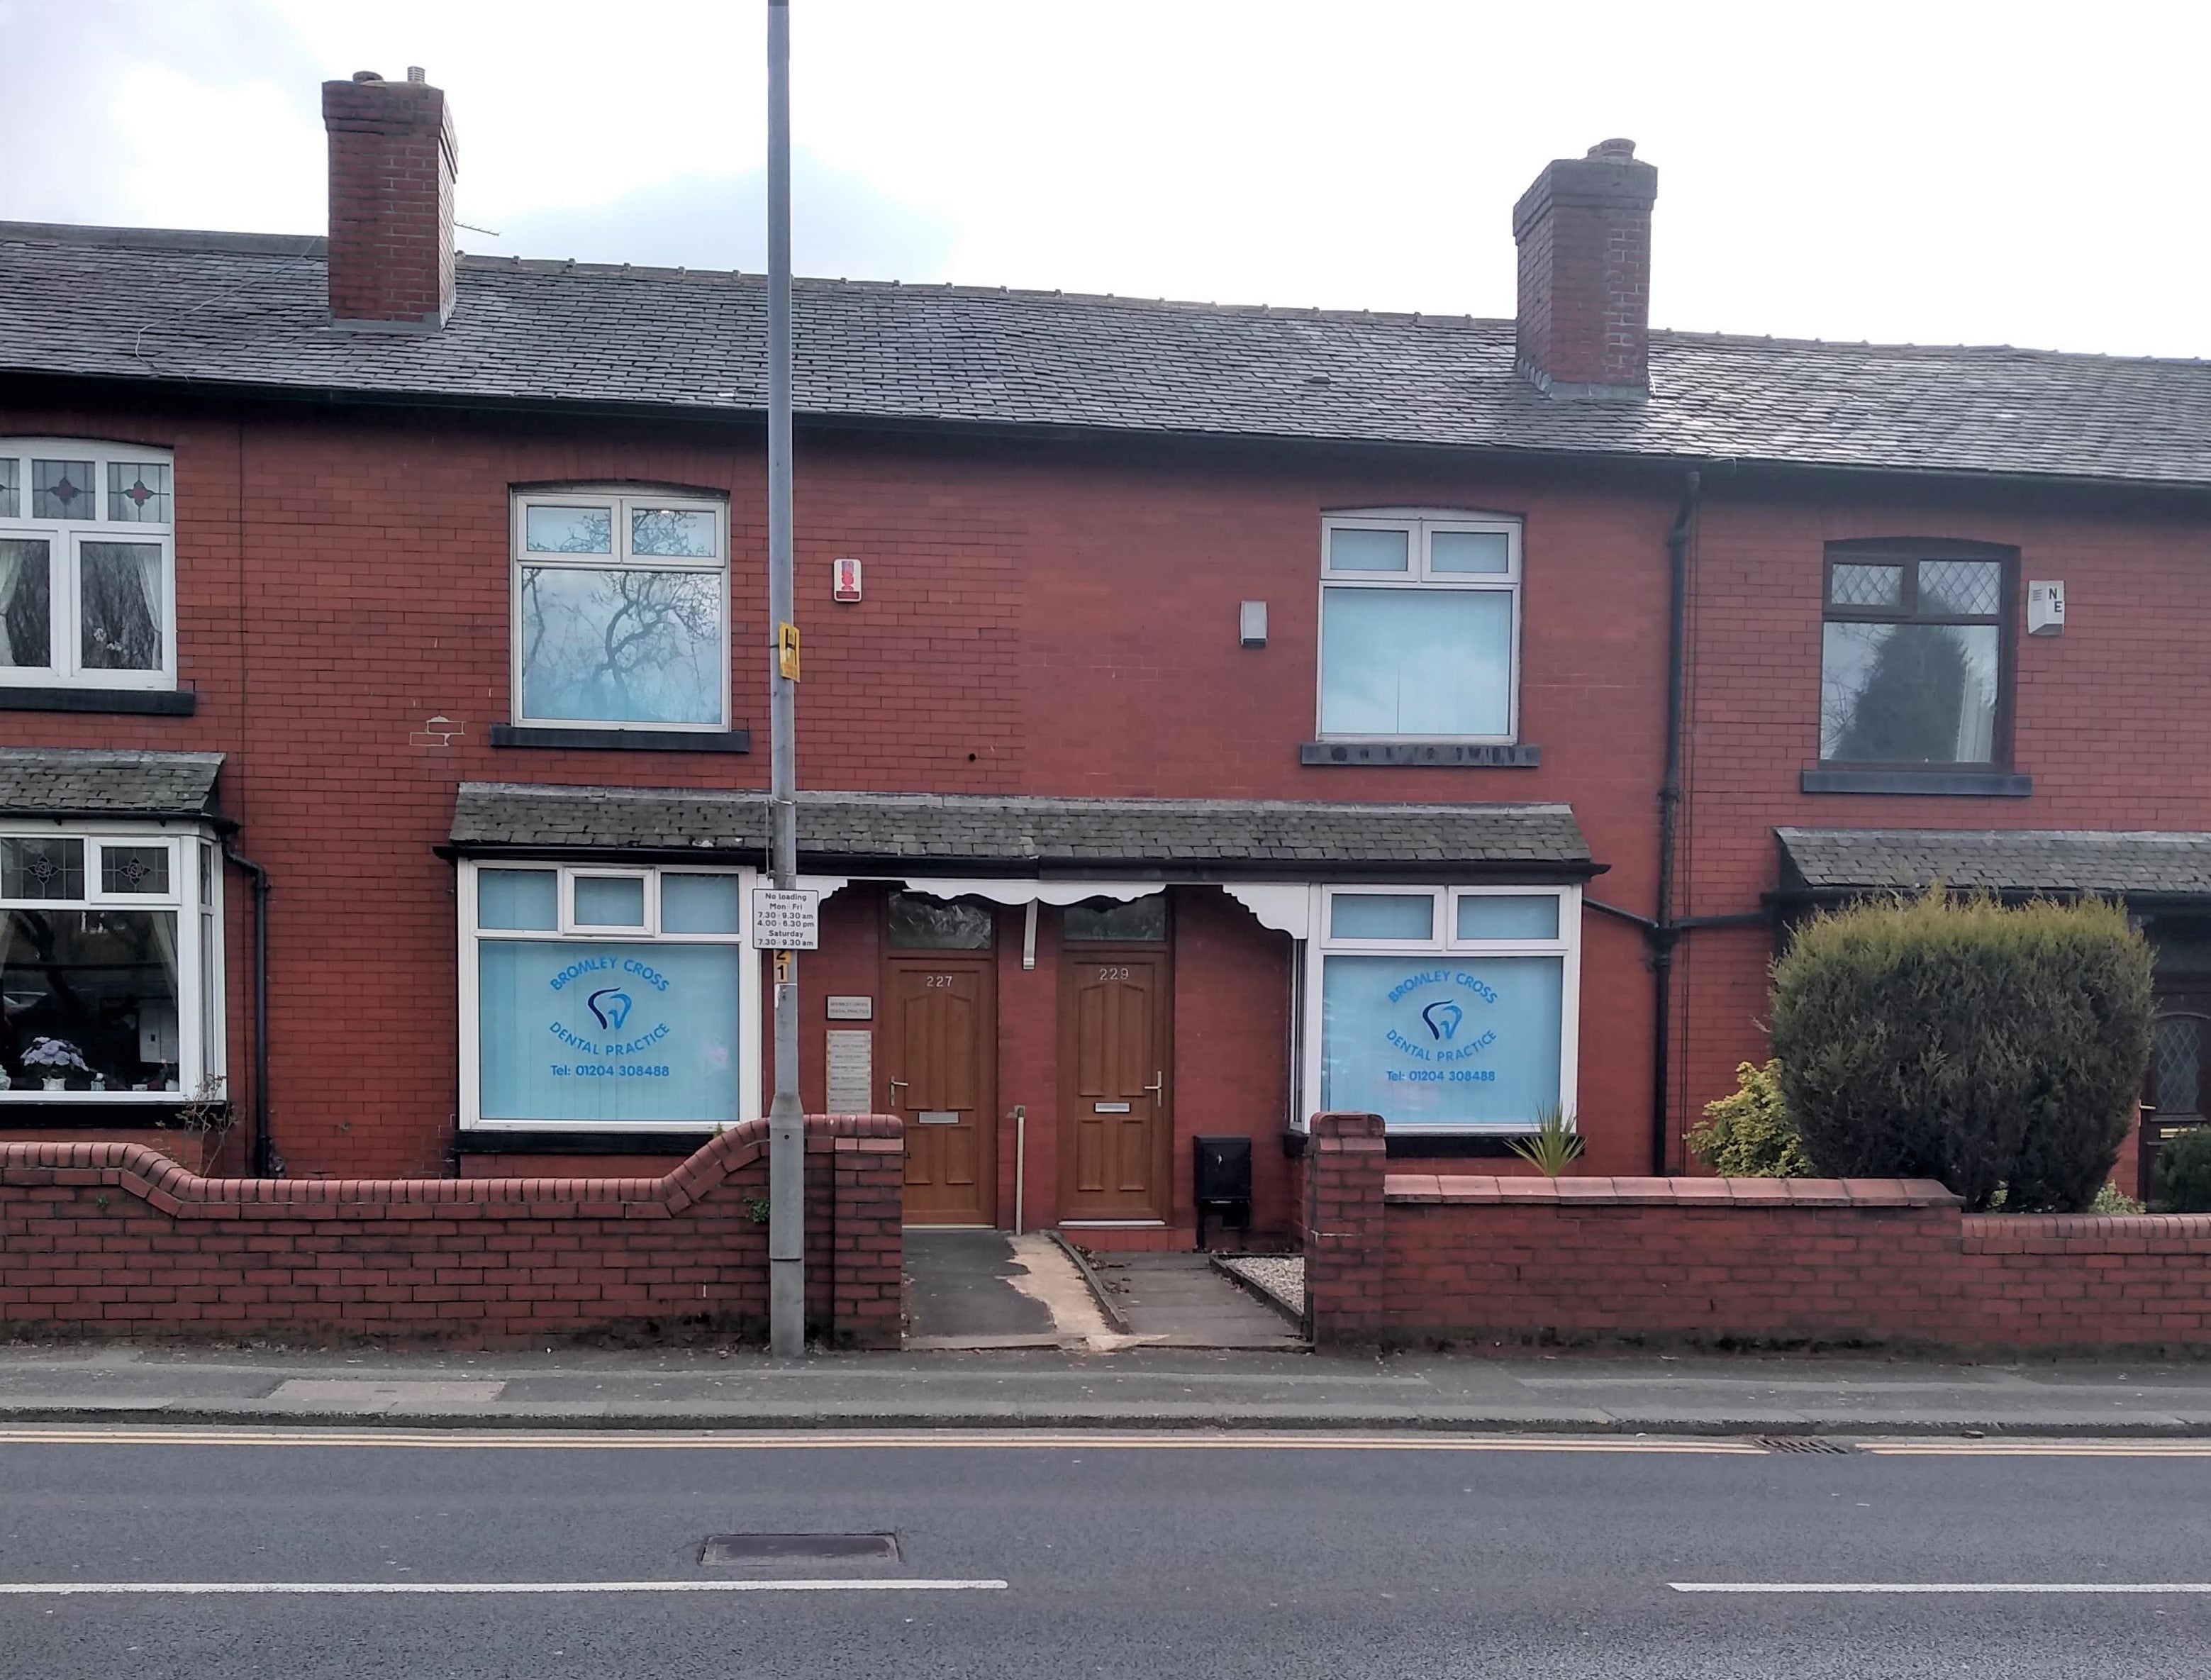 Bromley Cross Dental Practice in Bolton, Greater Manchester.